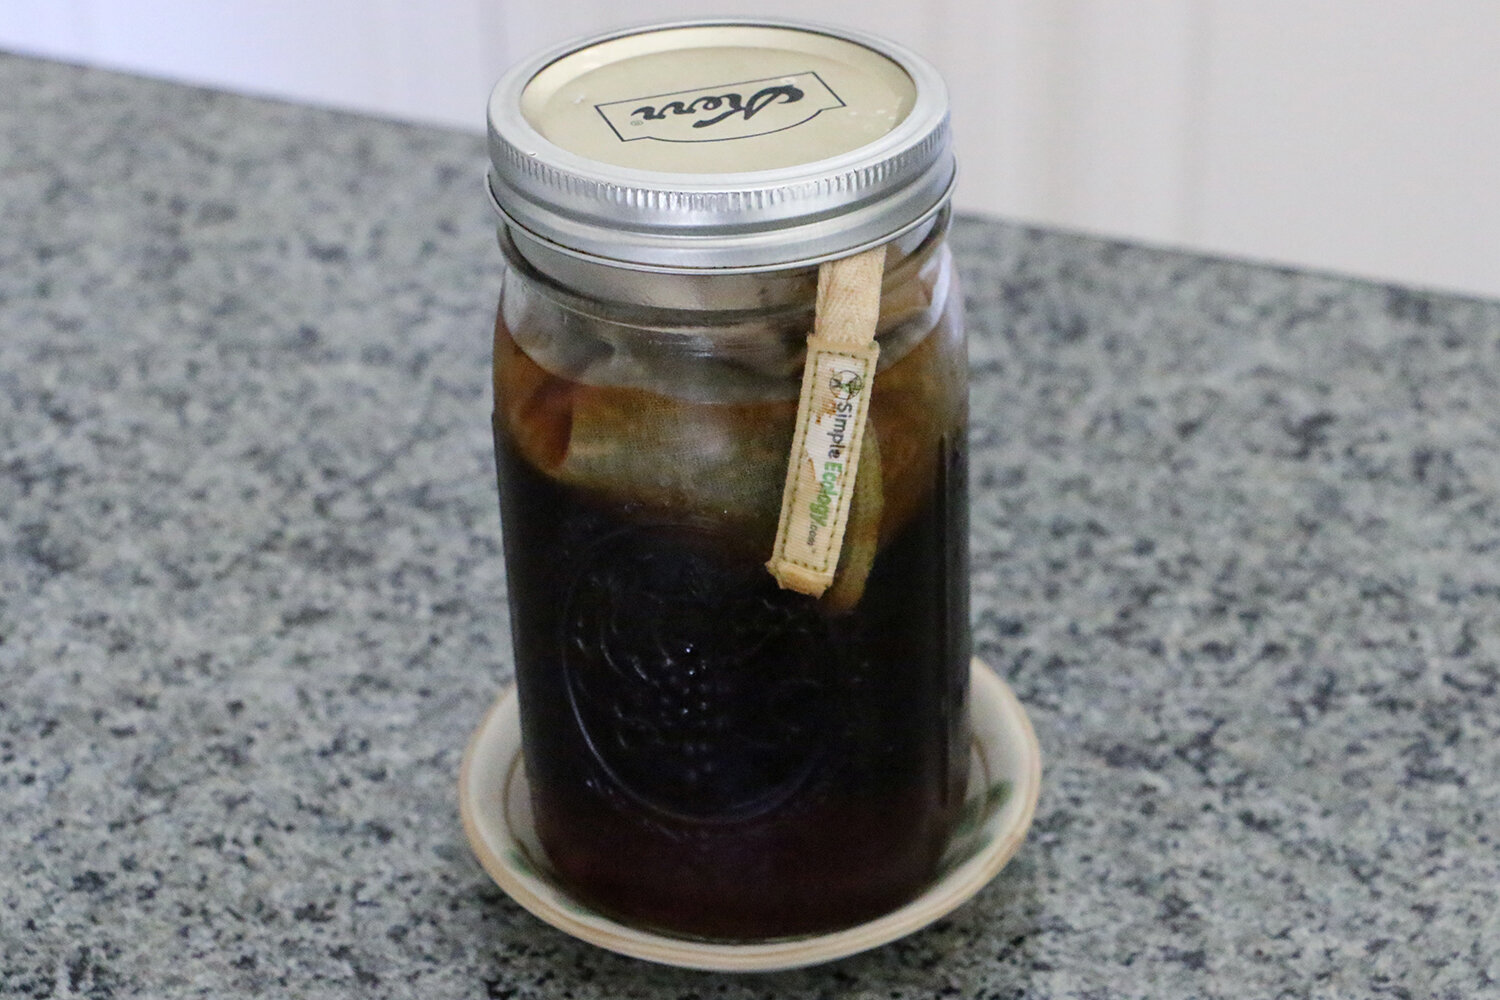 Allow coffee to steep to turn into cold brew